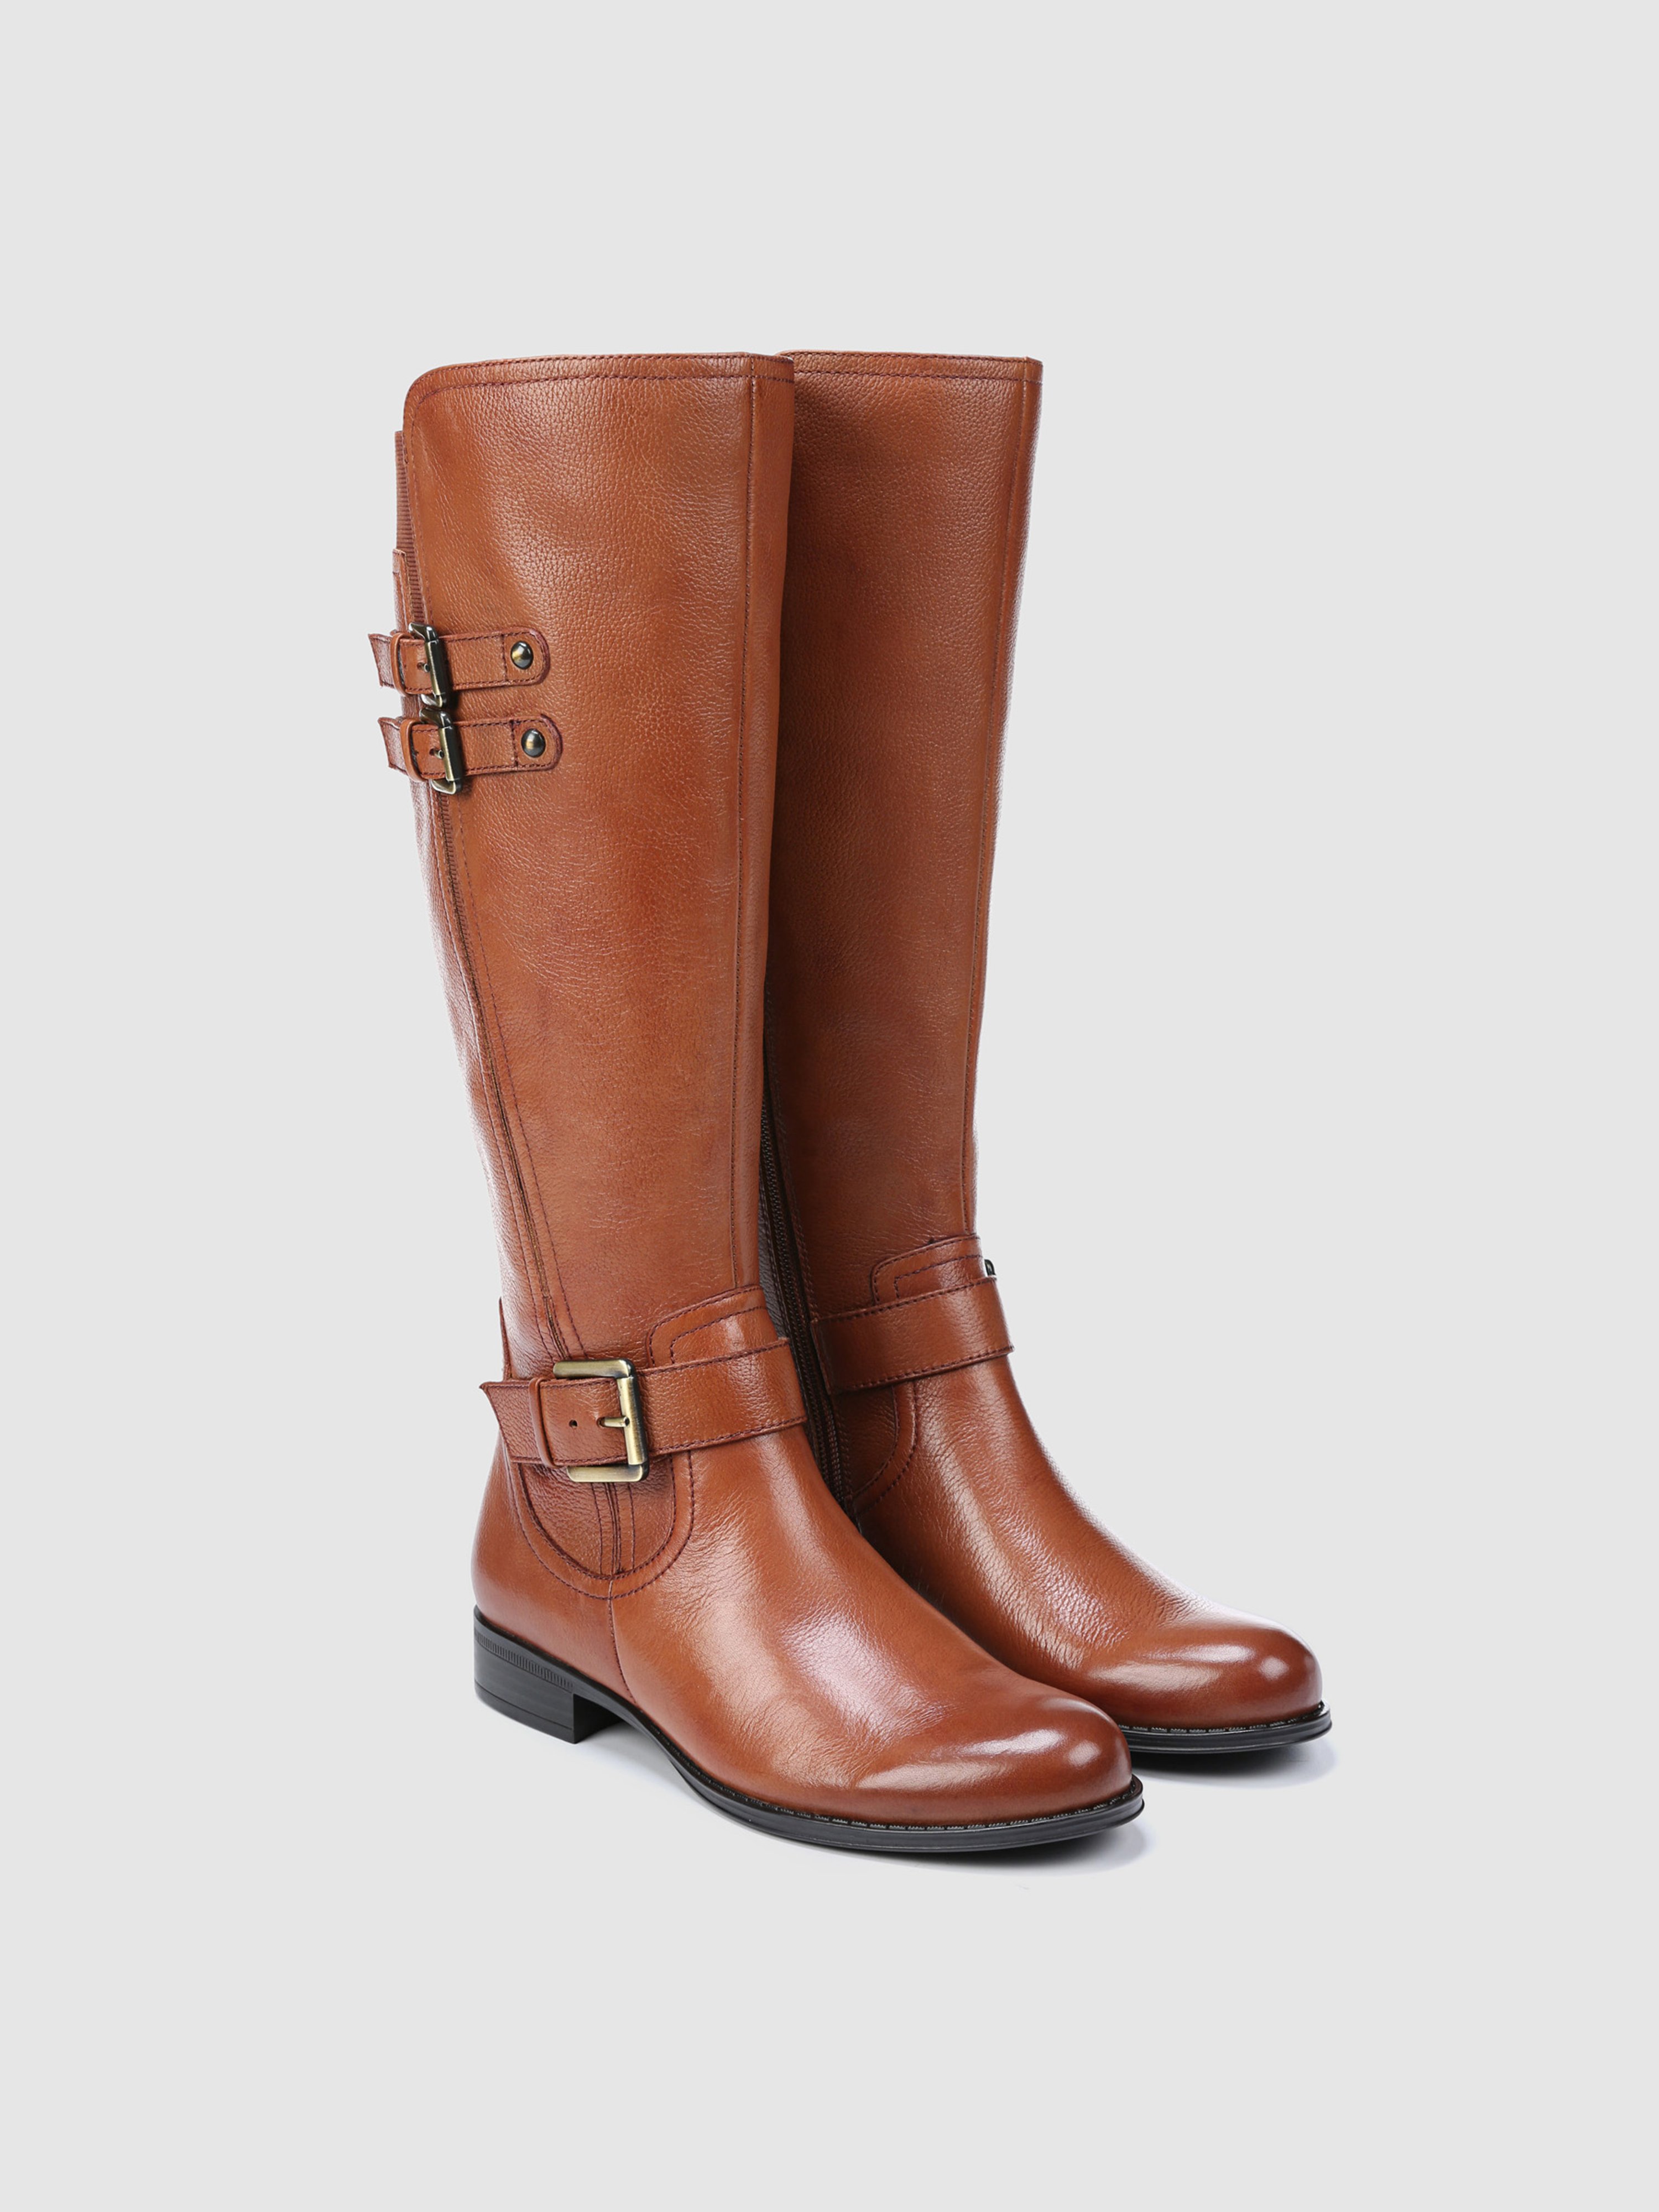 Naturalizer Jessie Tall Boots In Banana Bread